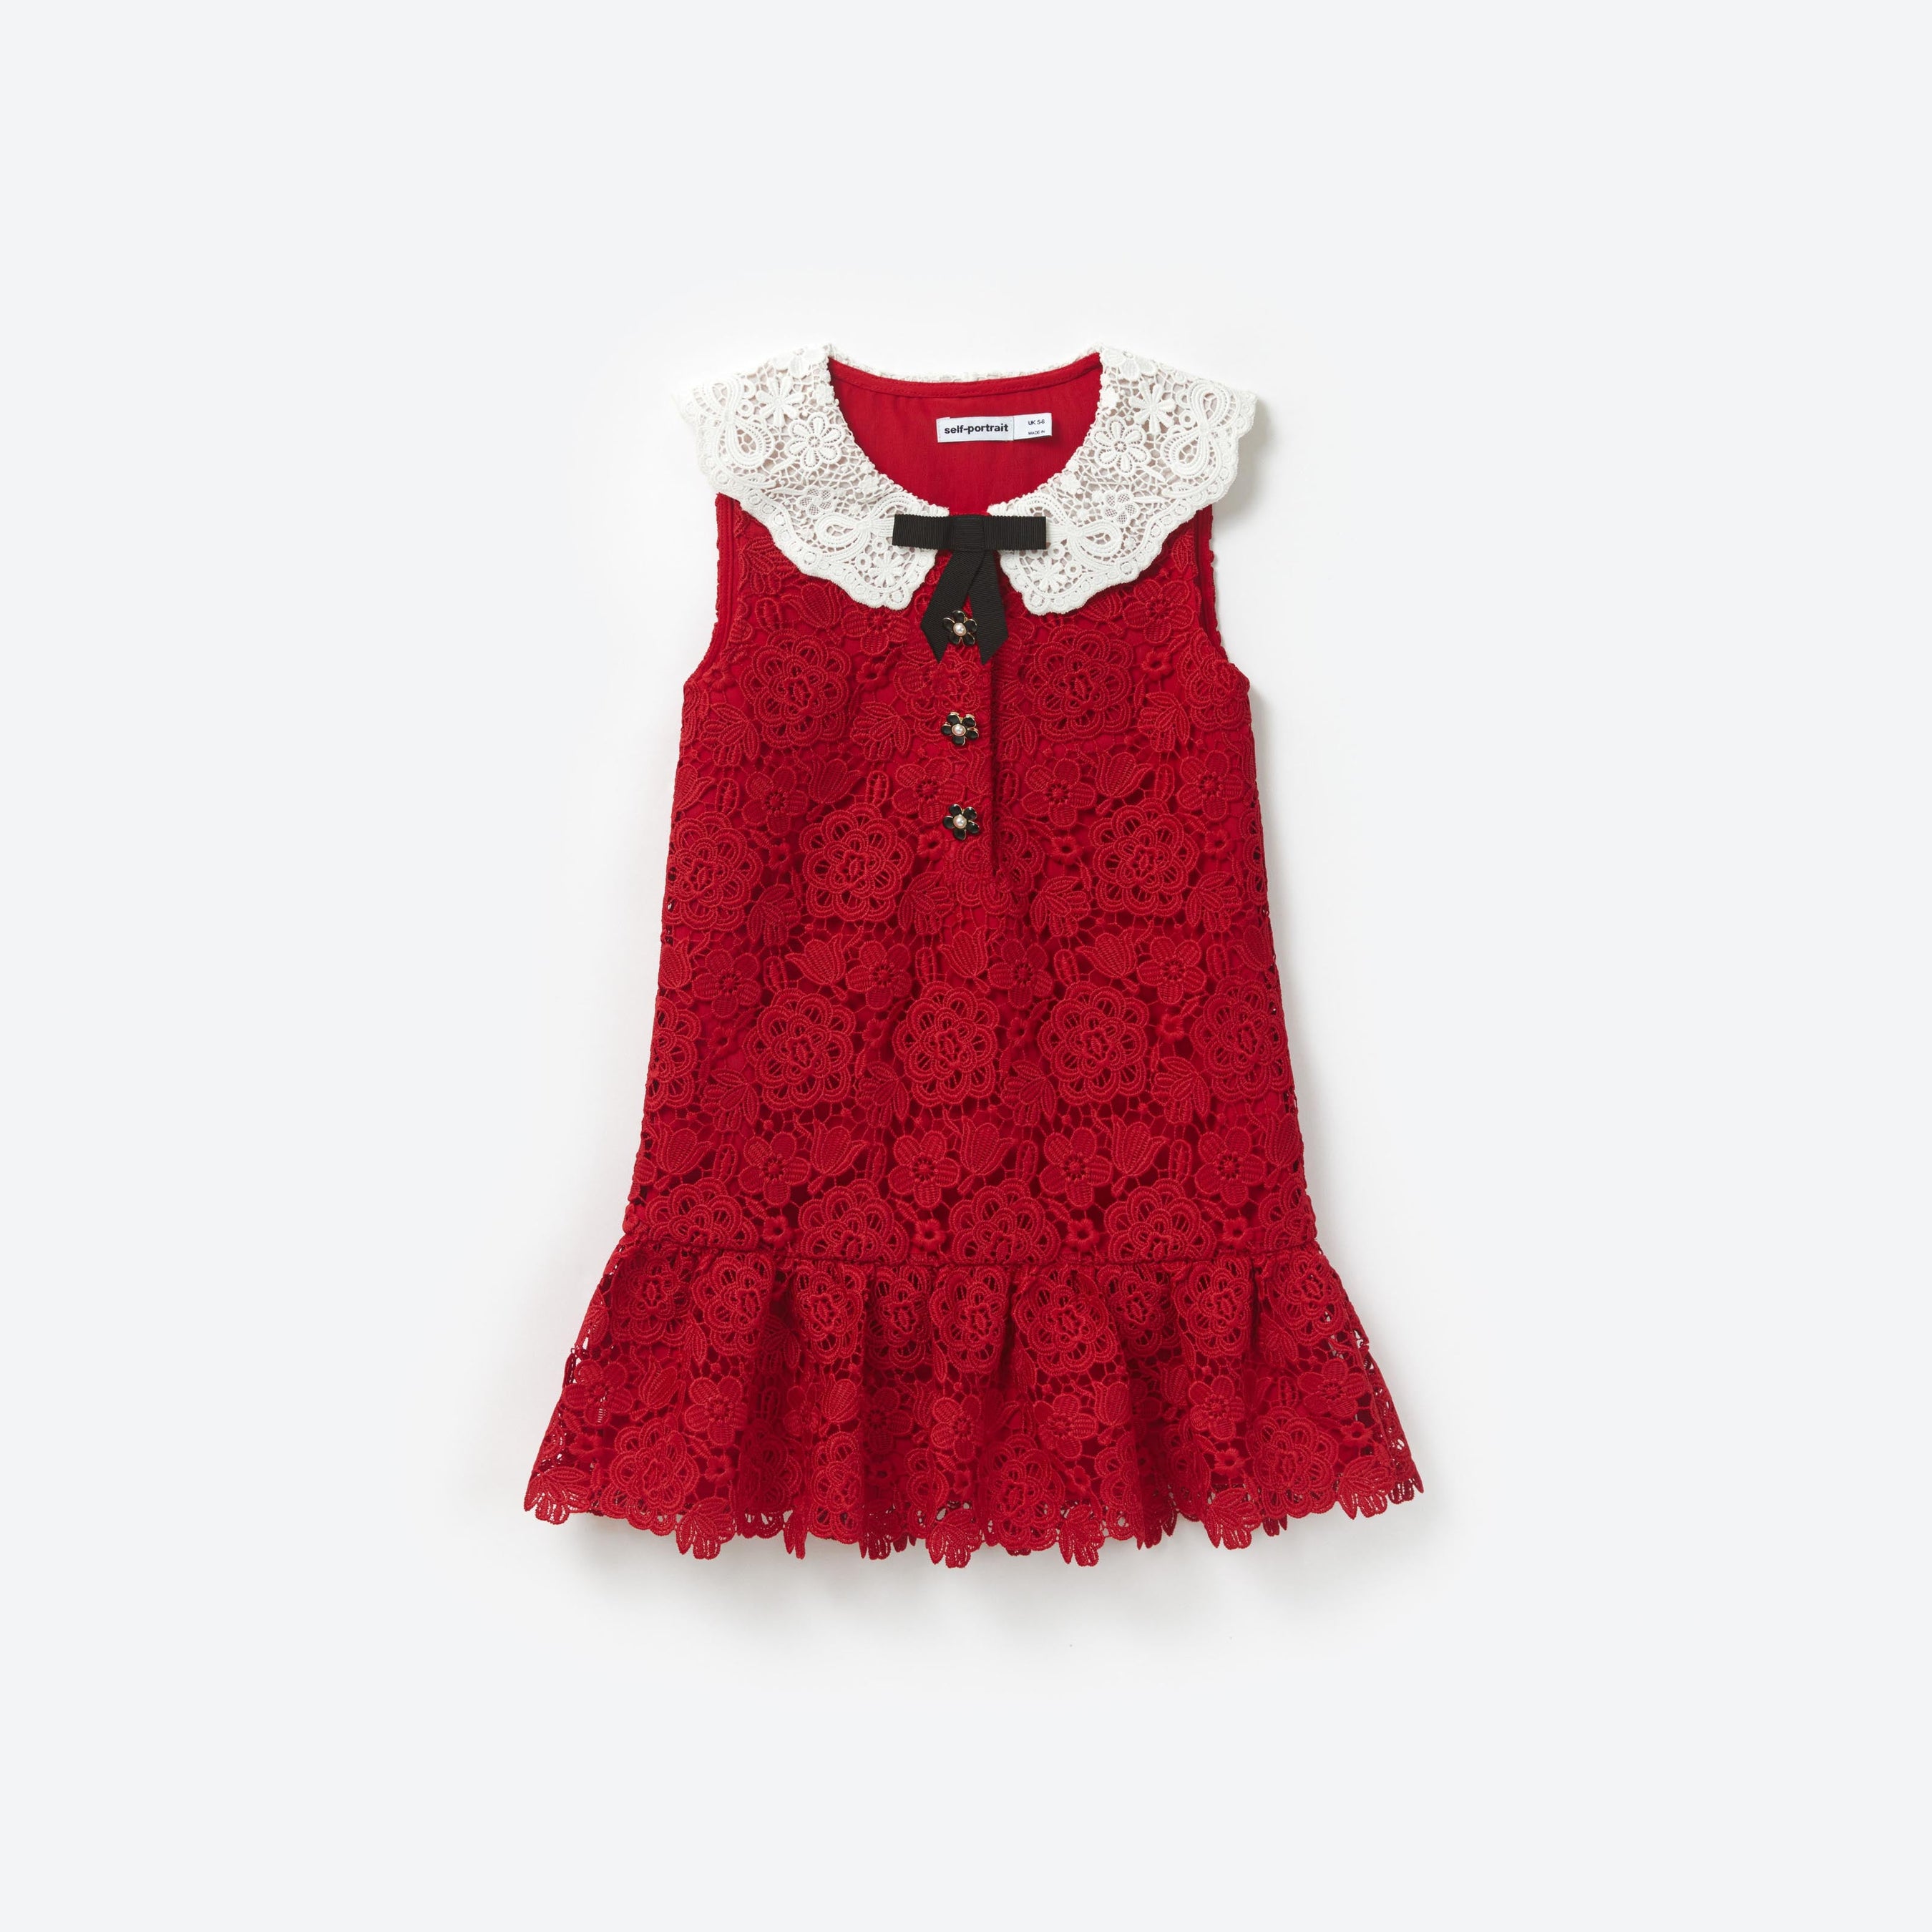 Red Lace Collar Dress